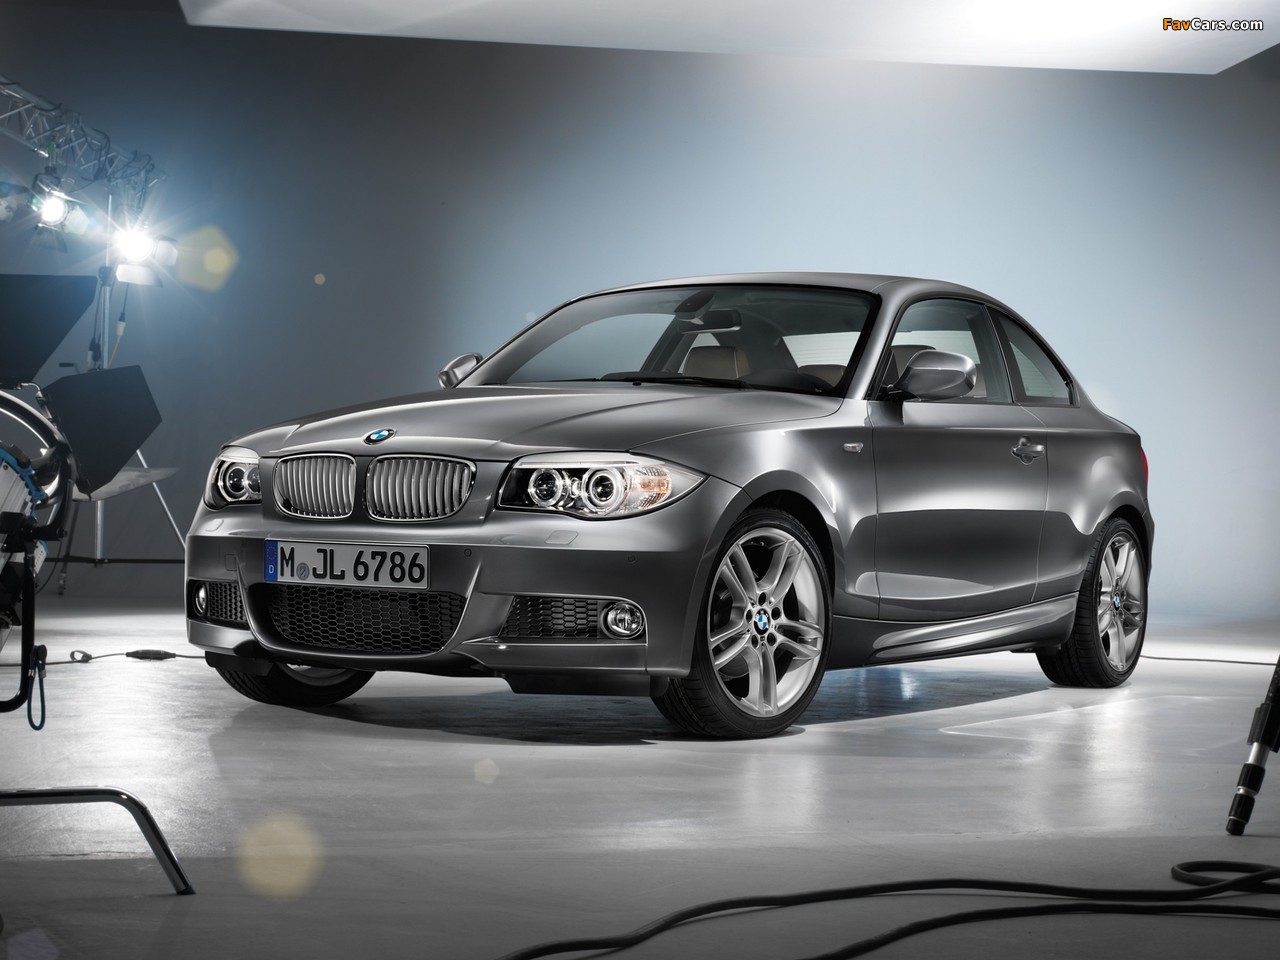 BMW 120d Coupe Lifestyle Edition (E82) 2013 wallpapers (1280 x 960)